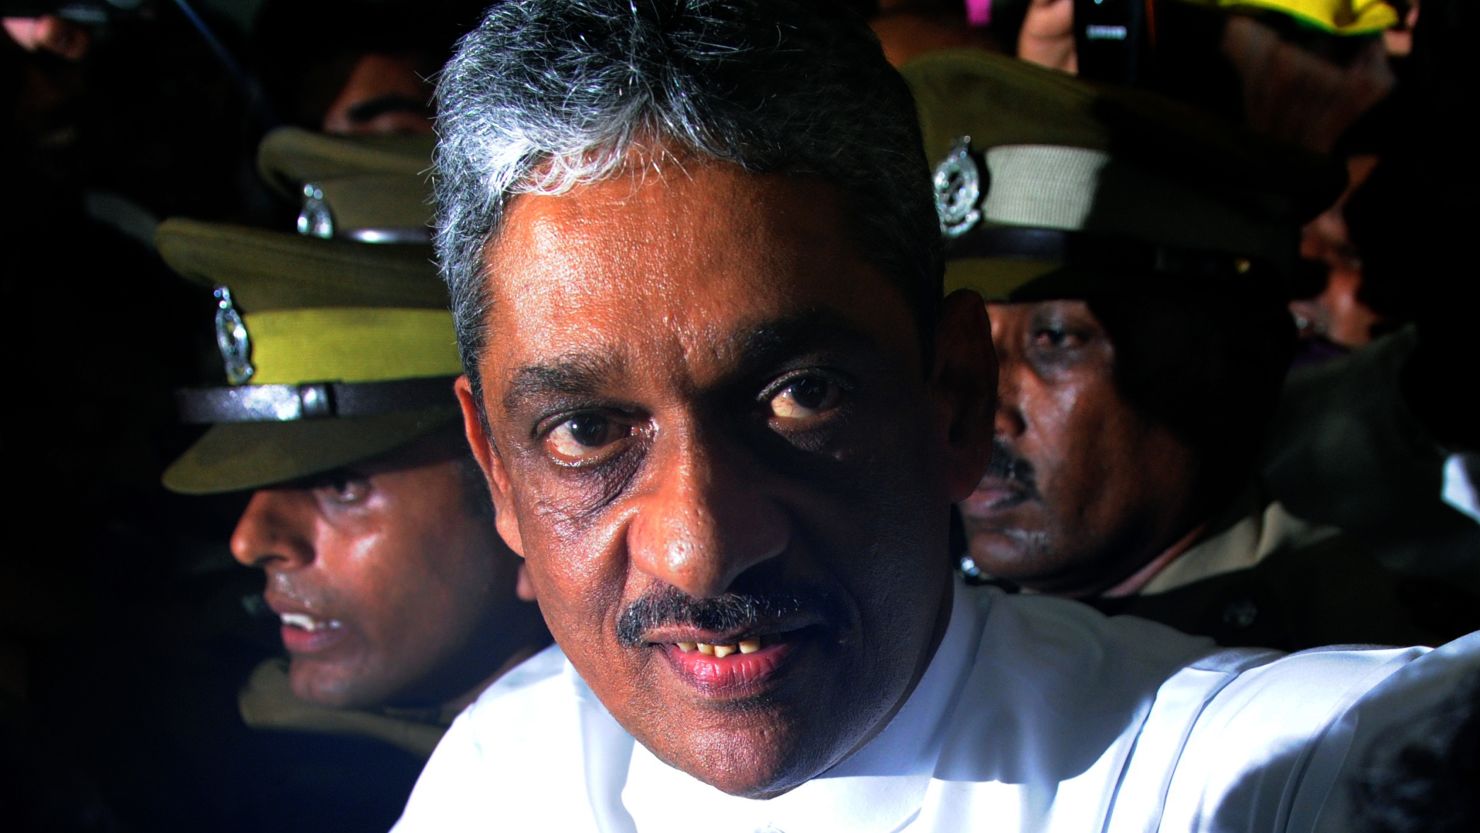 Sri Lanka's ex-army chief Sarath Fonseka leaves a private hospital in Colombo, ahead of being freed from prison.